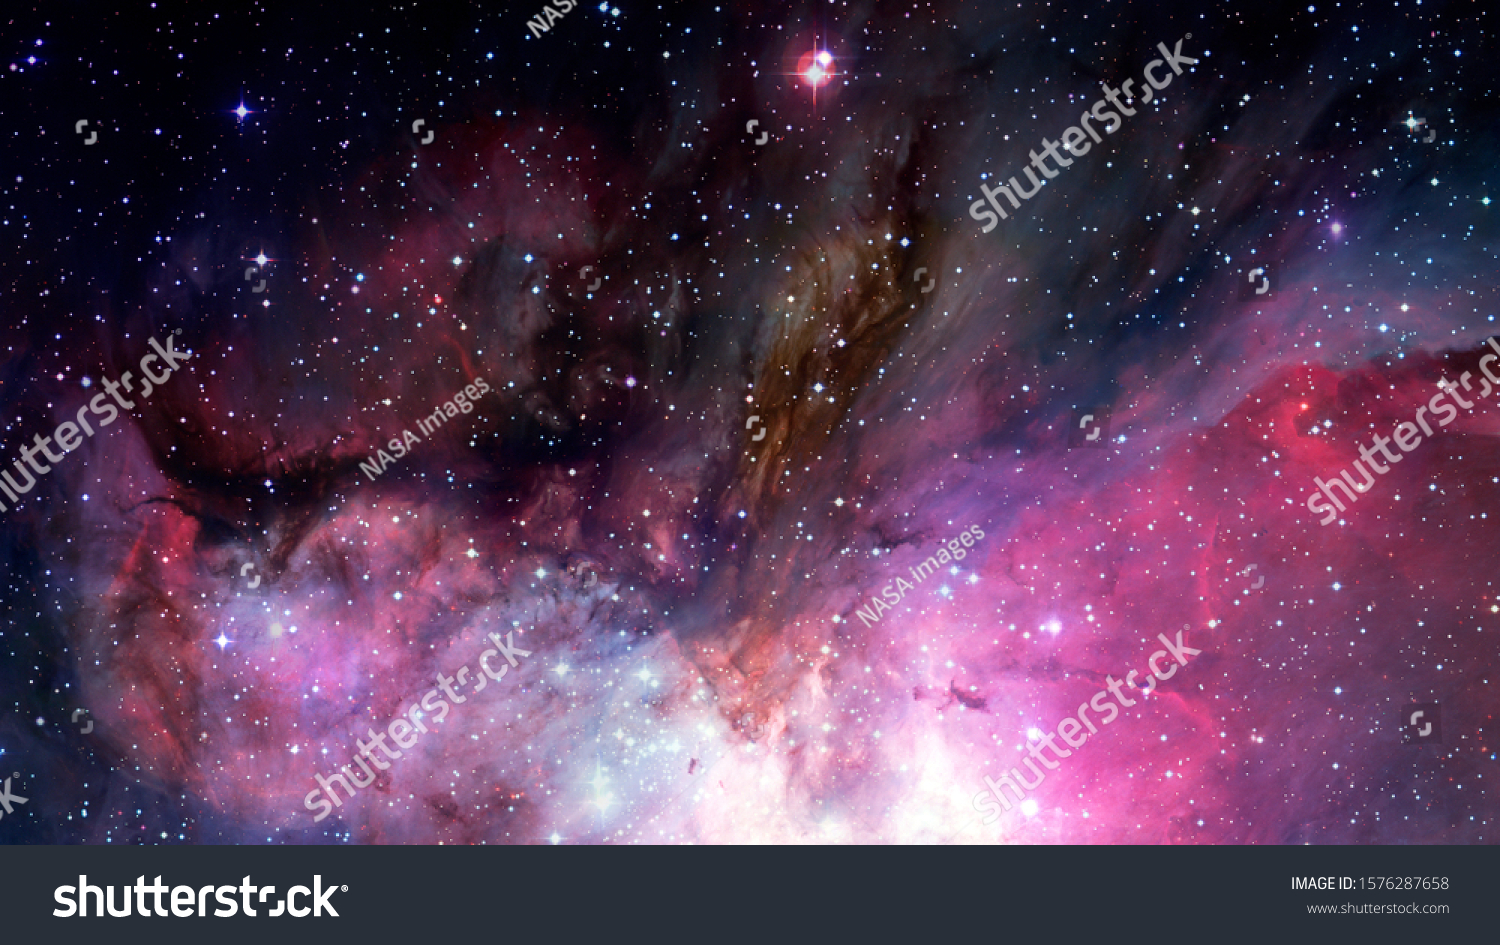 Infinite space background with nebulas and stars. This image elements furnished by NASA #1576287658